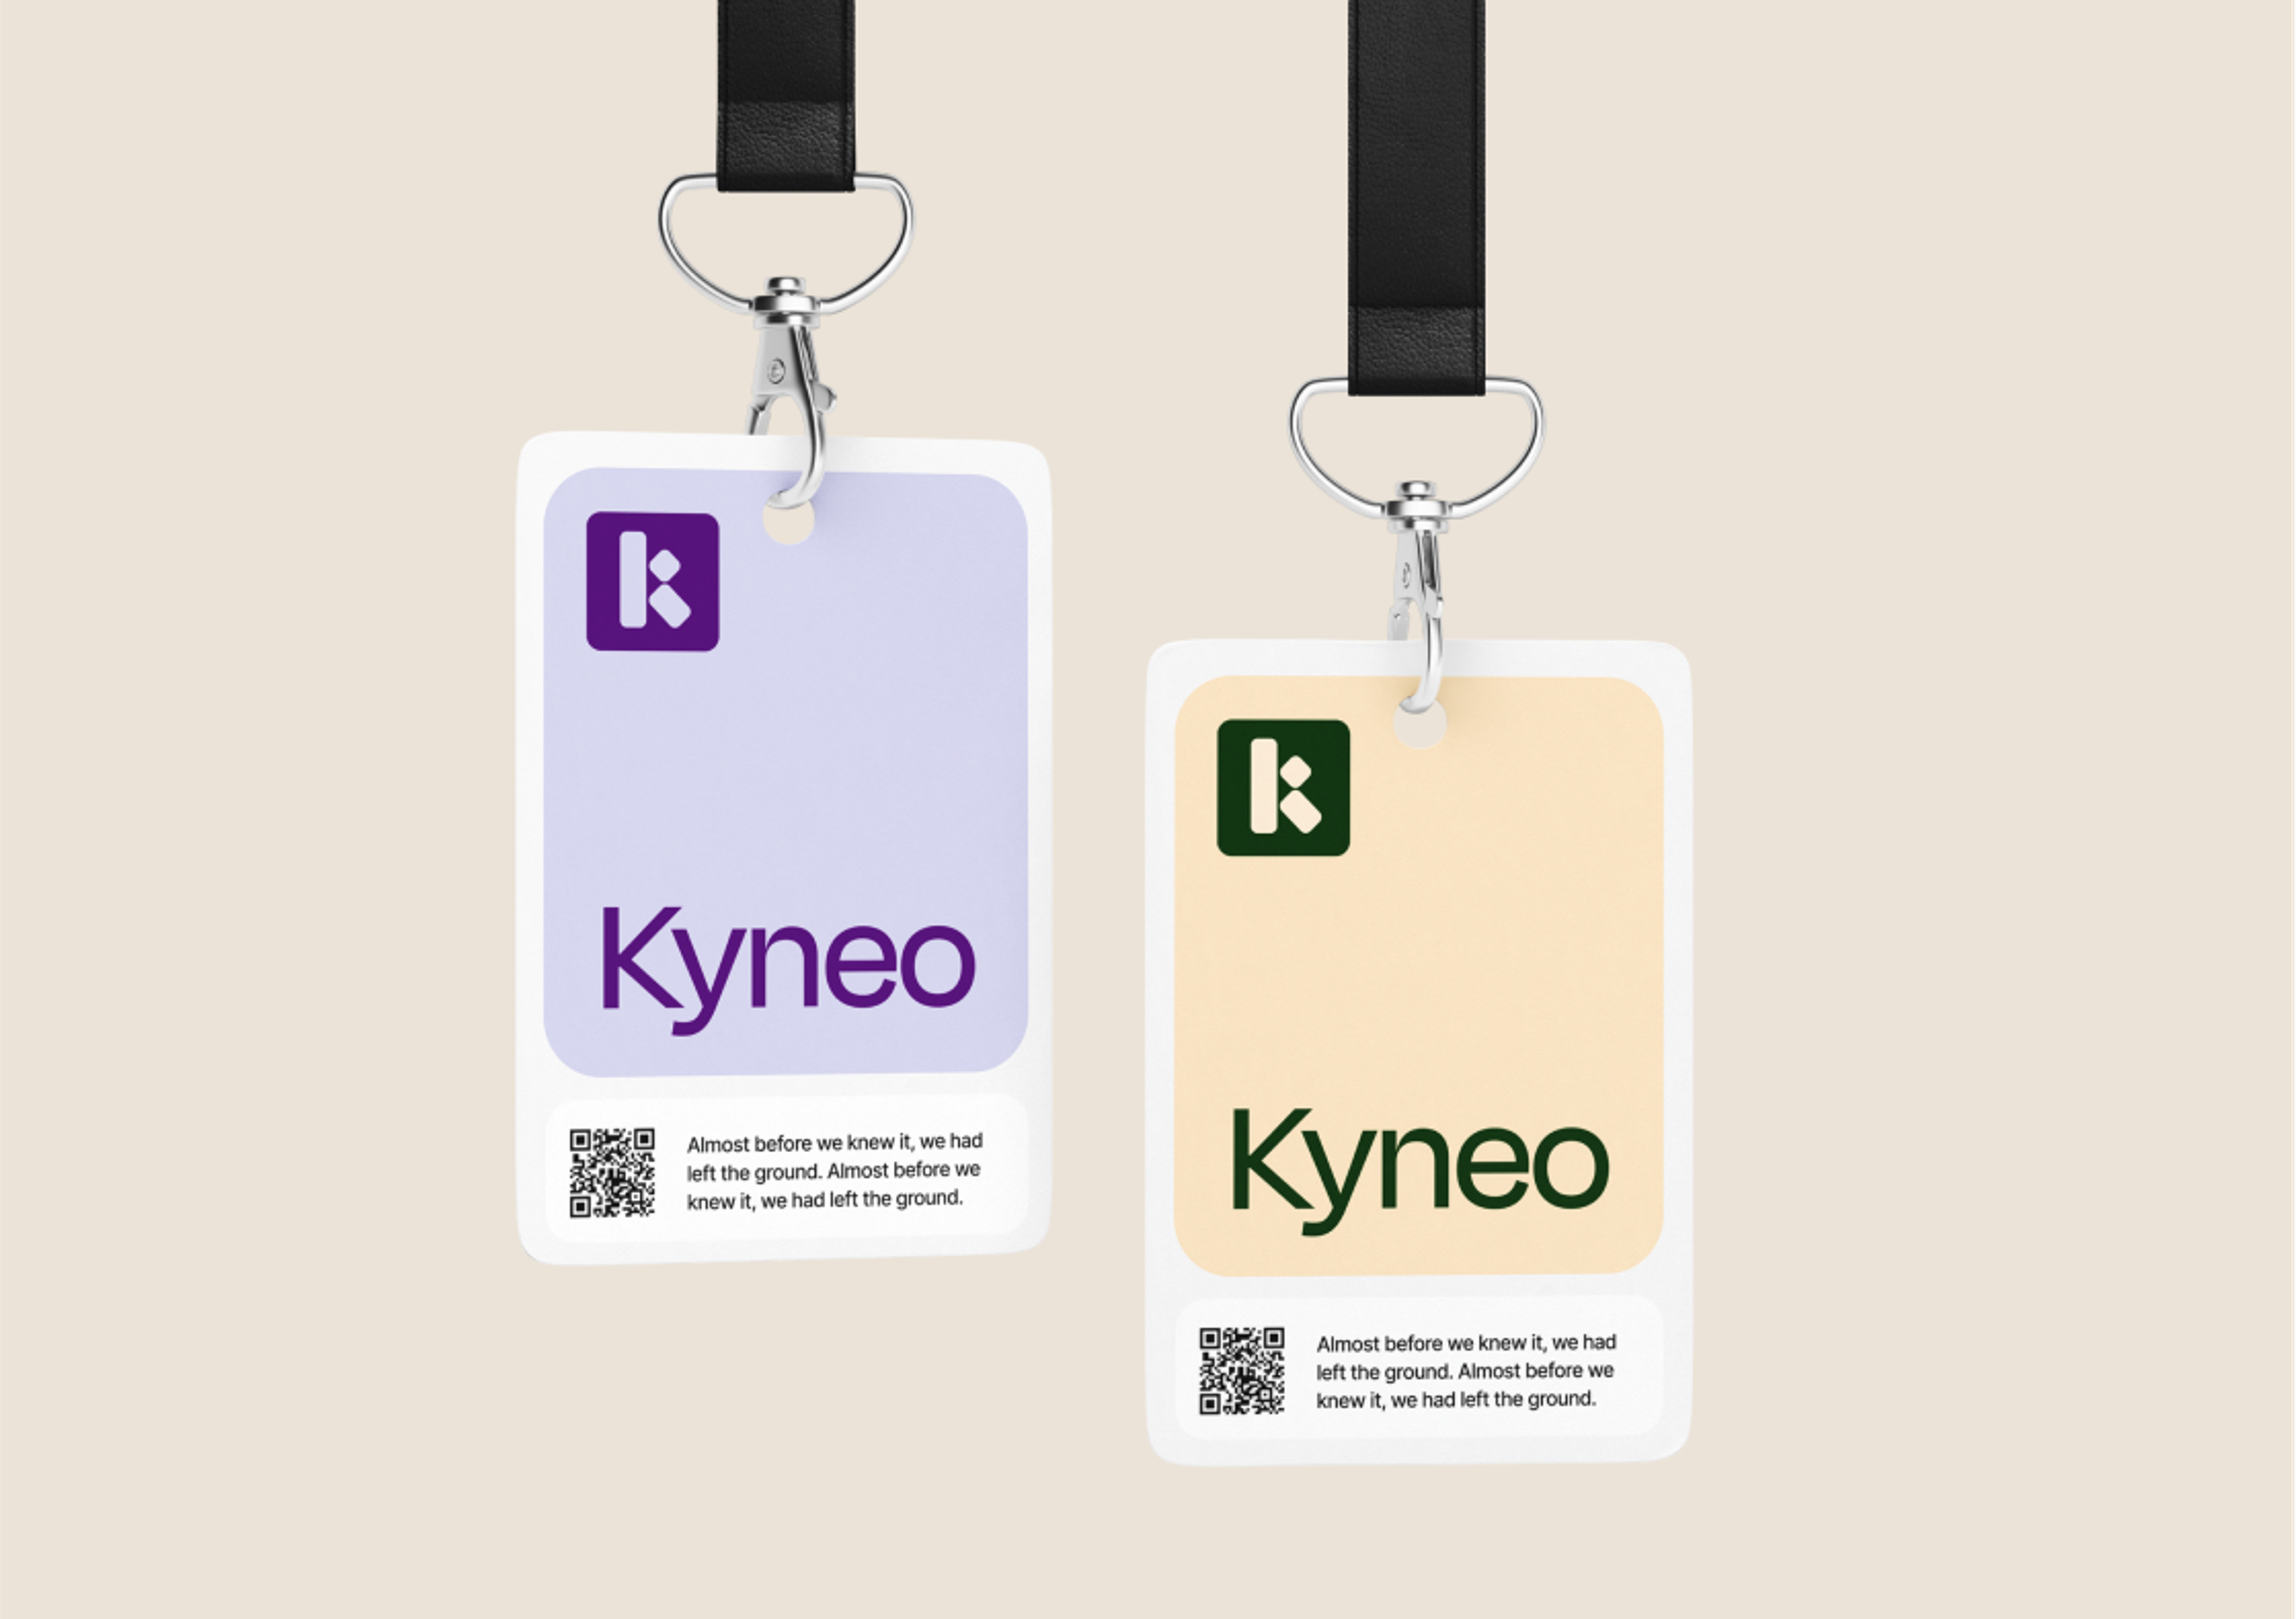 Kyneo, bridging office and field operations